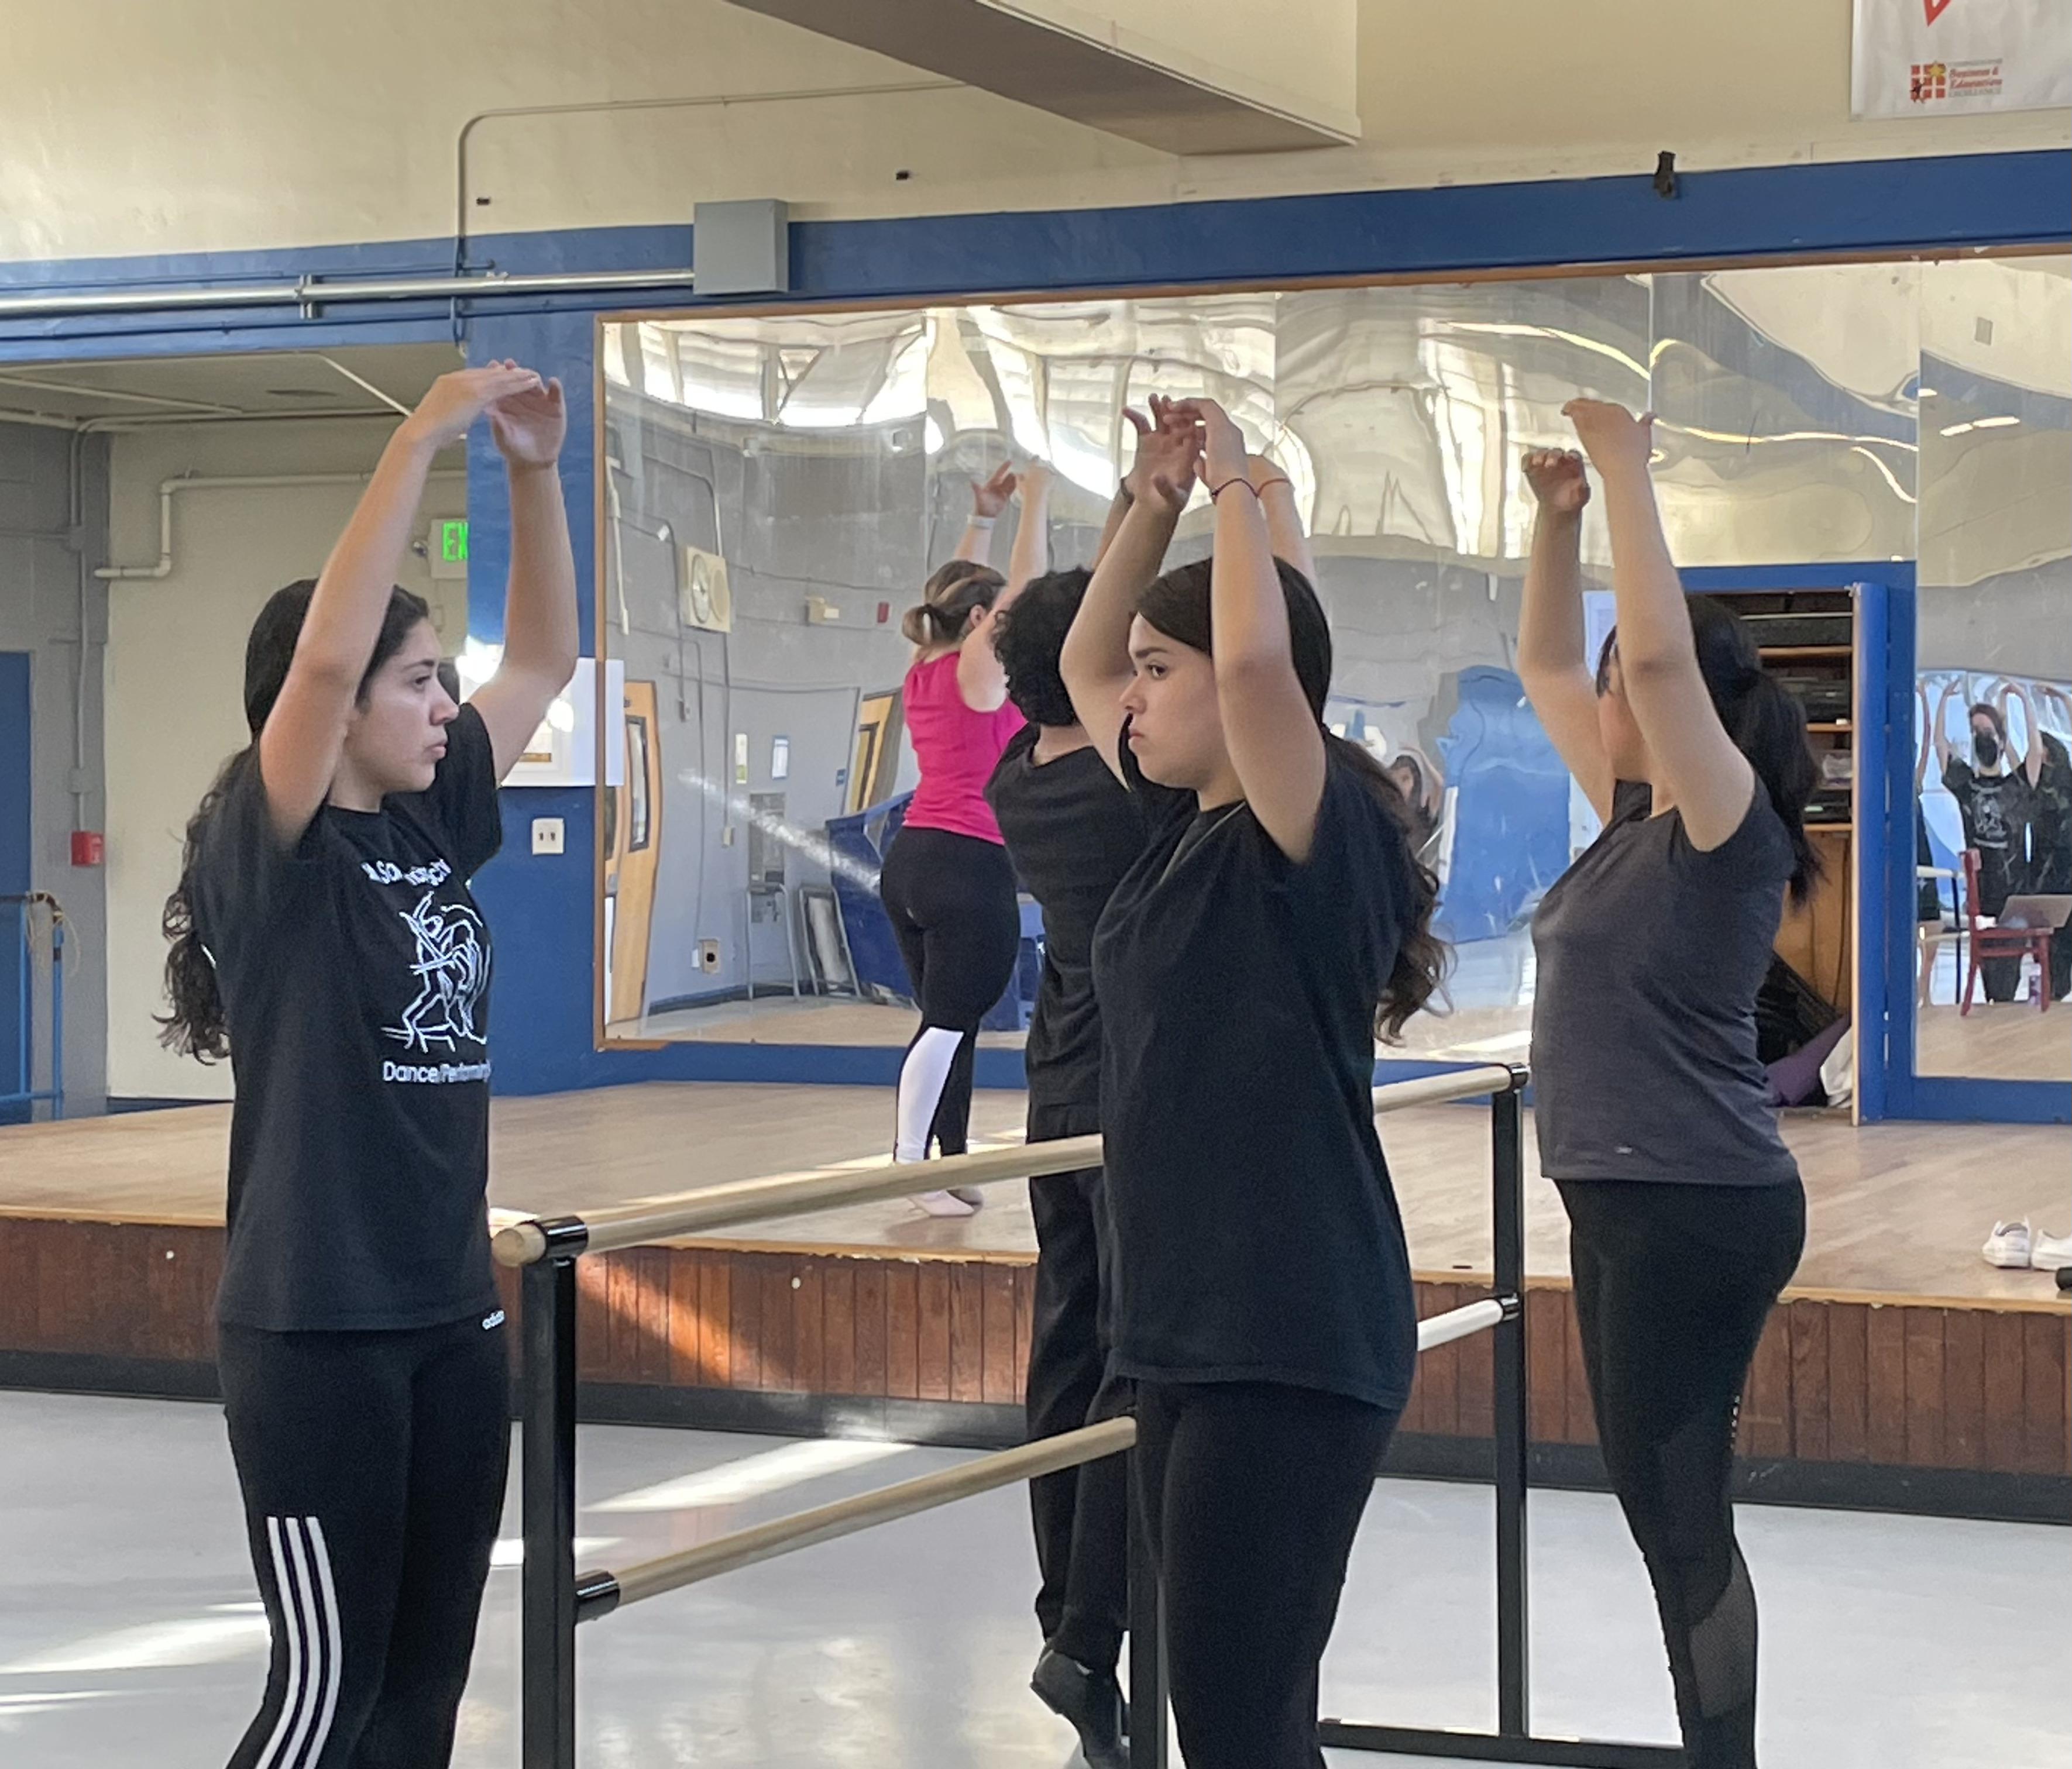 South City High students receive an introduction to ballet through the school's dance program.